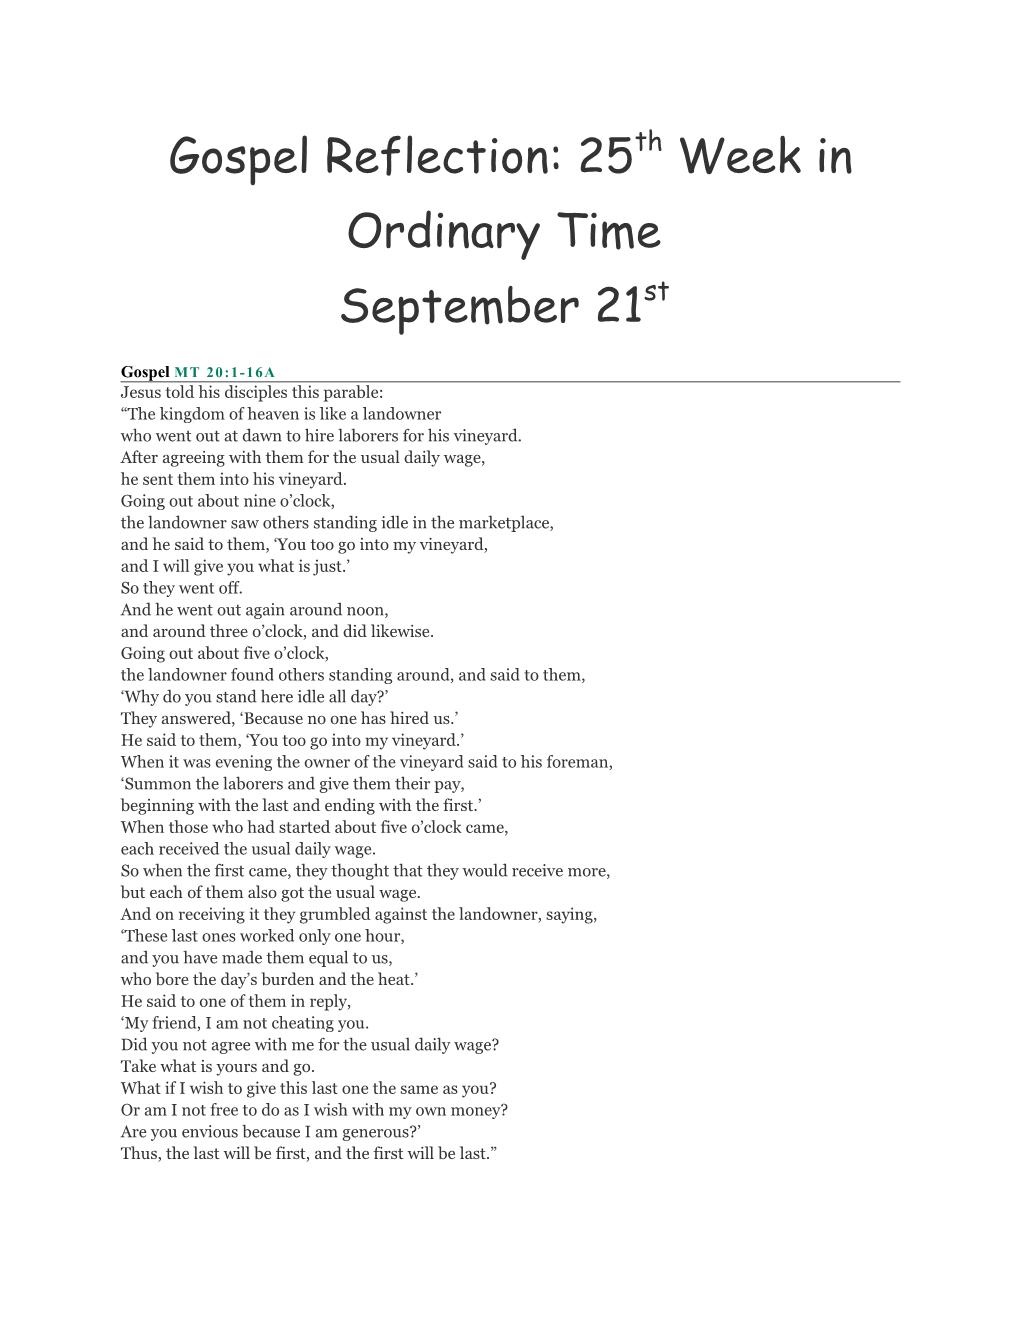 Gospel Reflection: 25Th Week in Ordinary Time September 21St